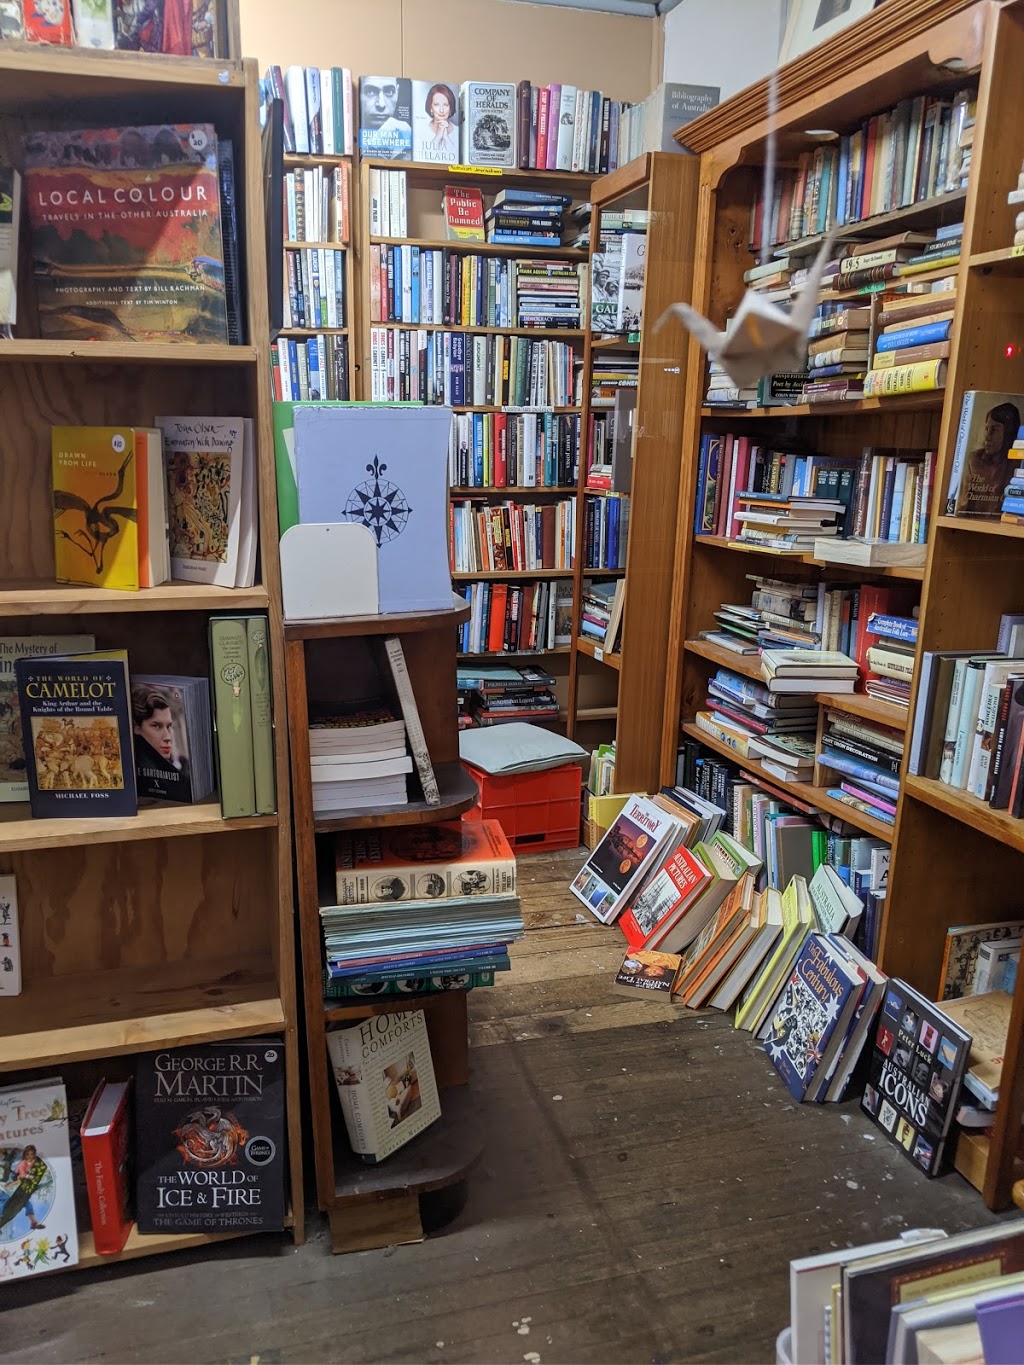 Cooks Hill Books & Records | book store | 72 Darby St, Cooks Hill NSW 2300, Australia | 0249295079 OR +61 2 4929 5079